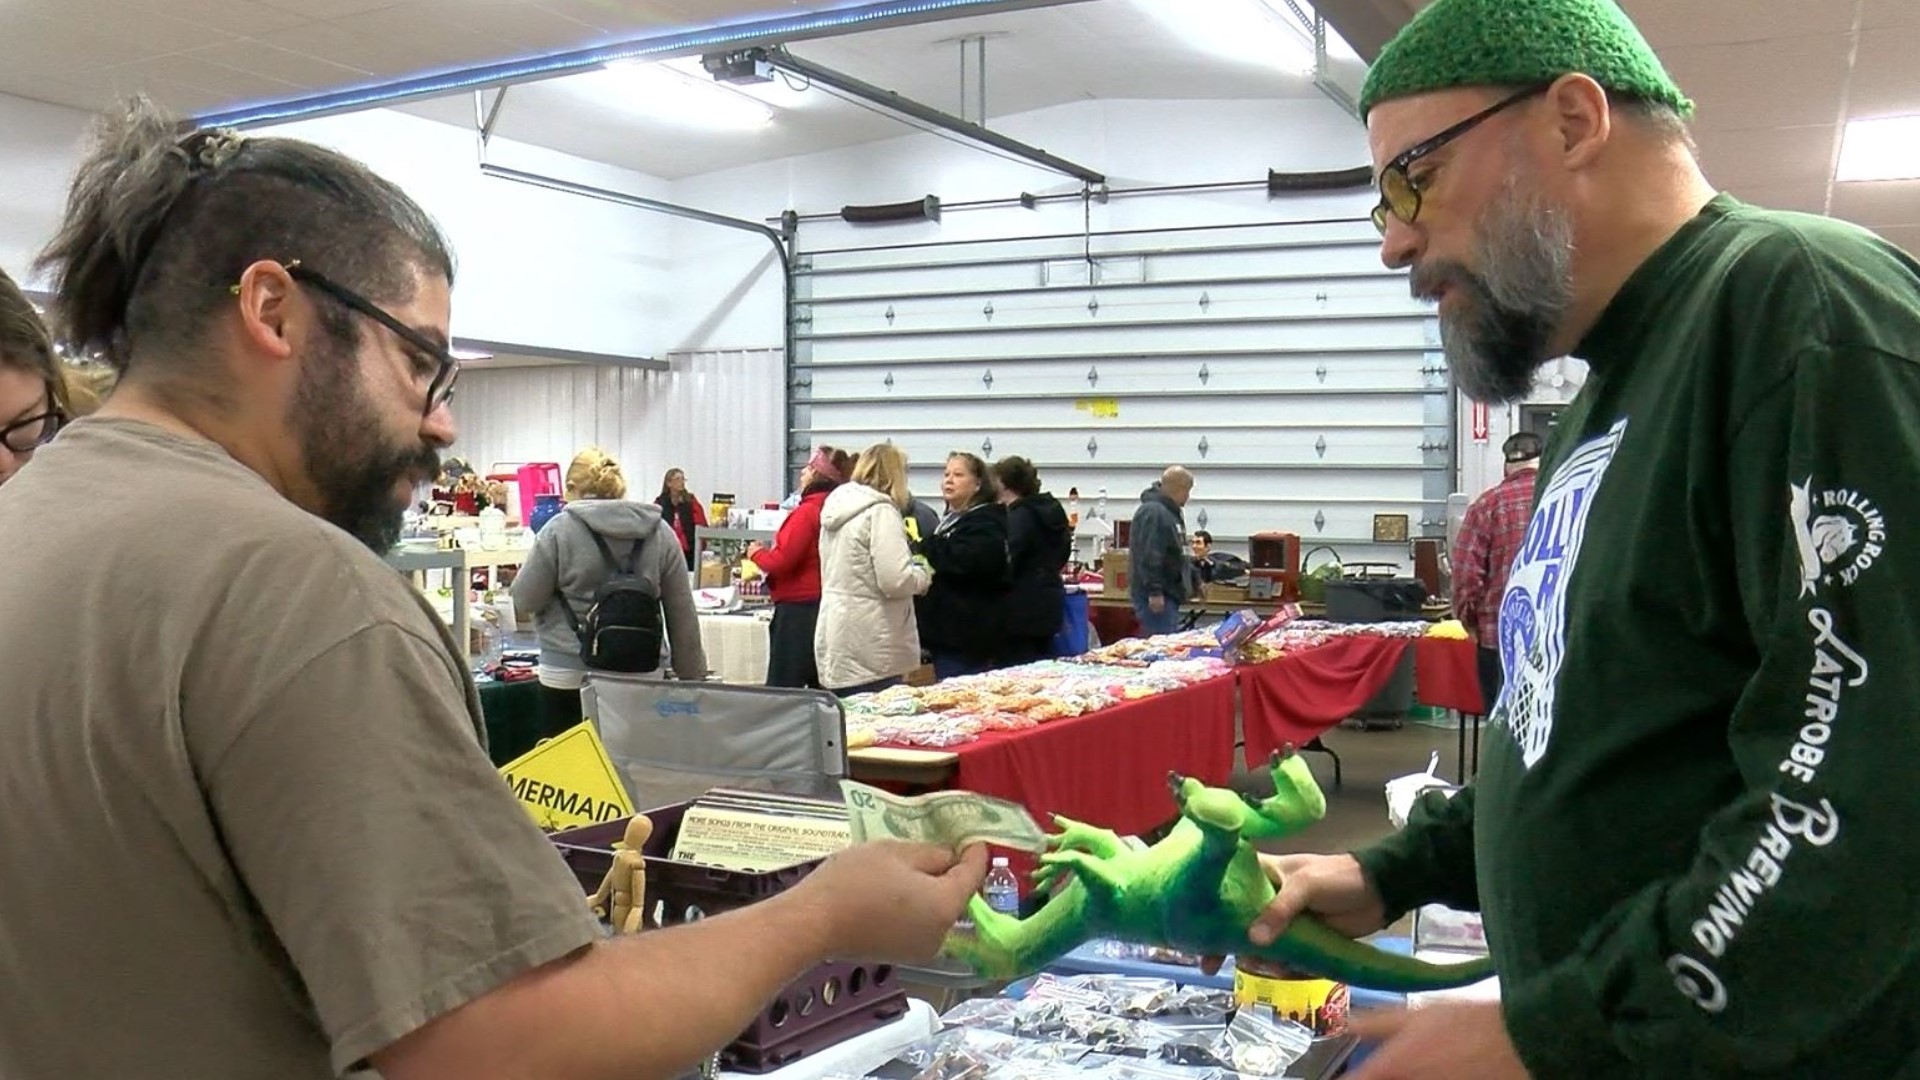 Vendors at the flea market say it's an easy transition to make from collecting to selling.